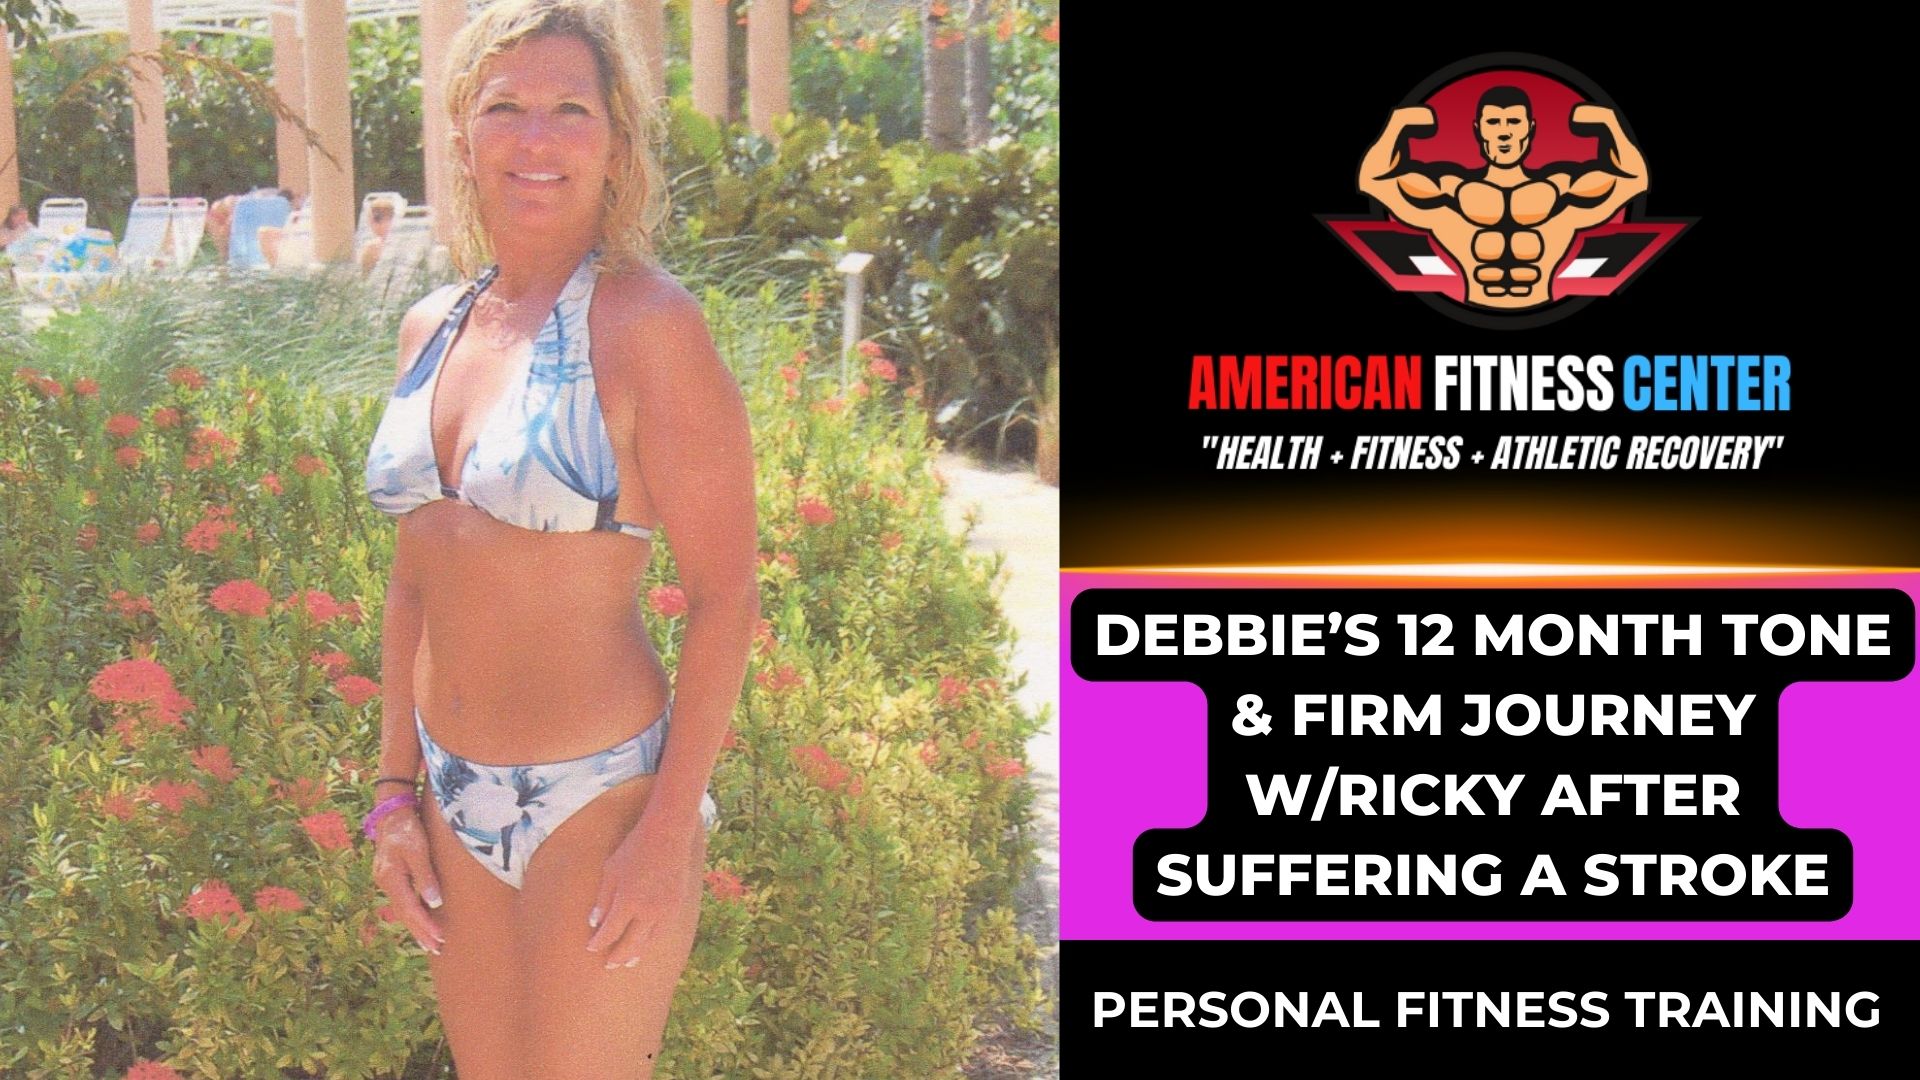 Personal-Fitness-Training-For-Mobility-Enhancement-American-Fitness-Center-Fayetteville-GA